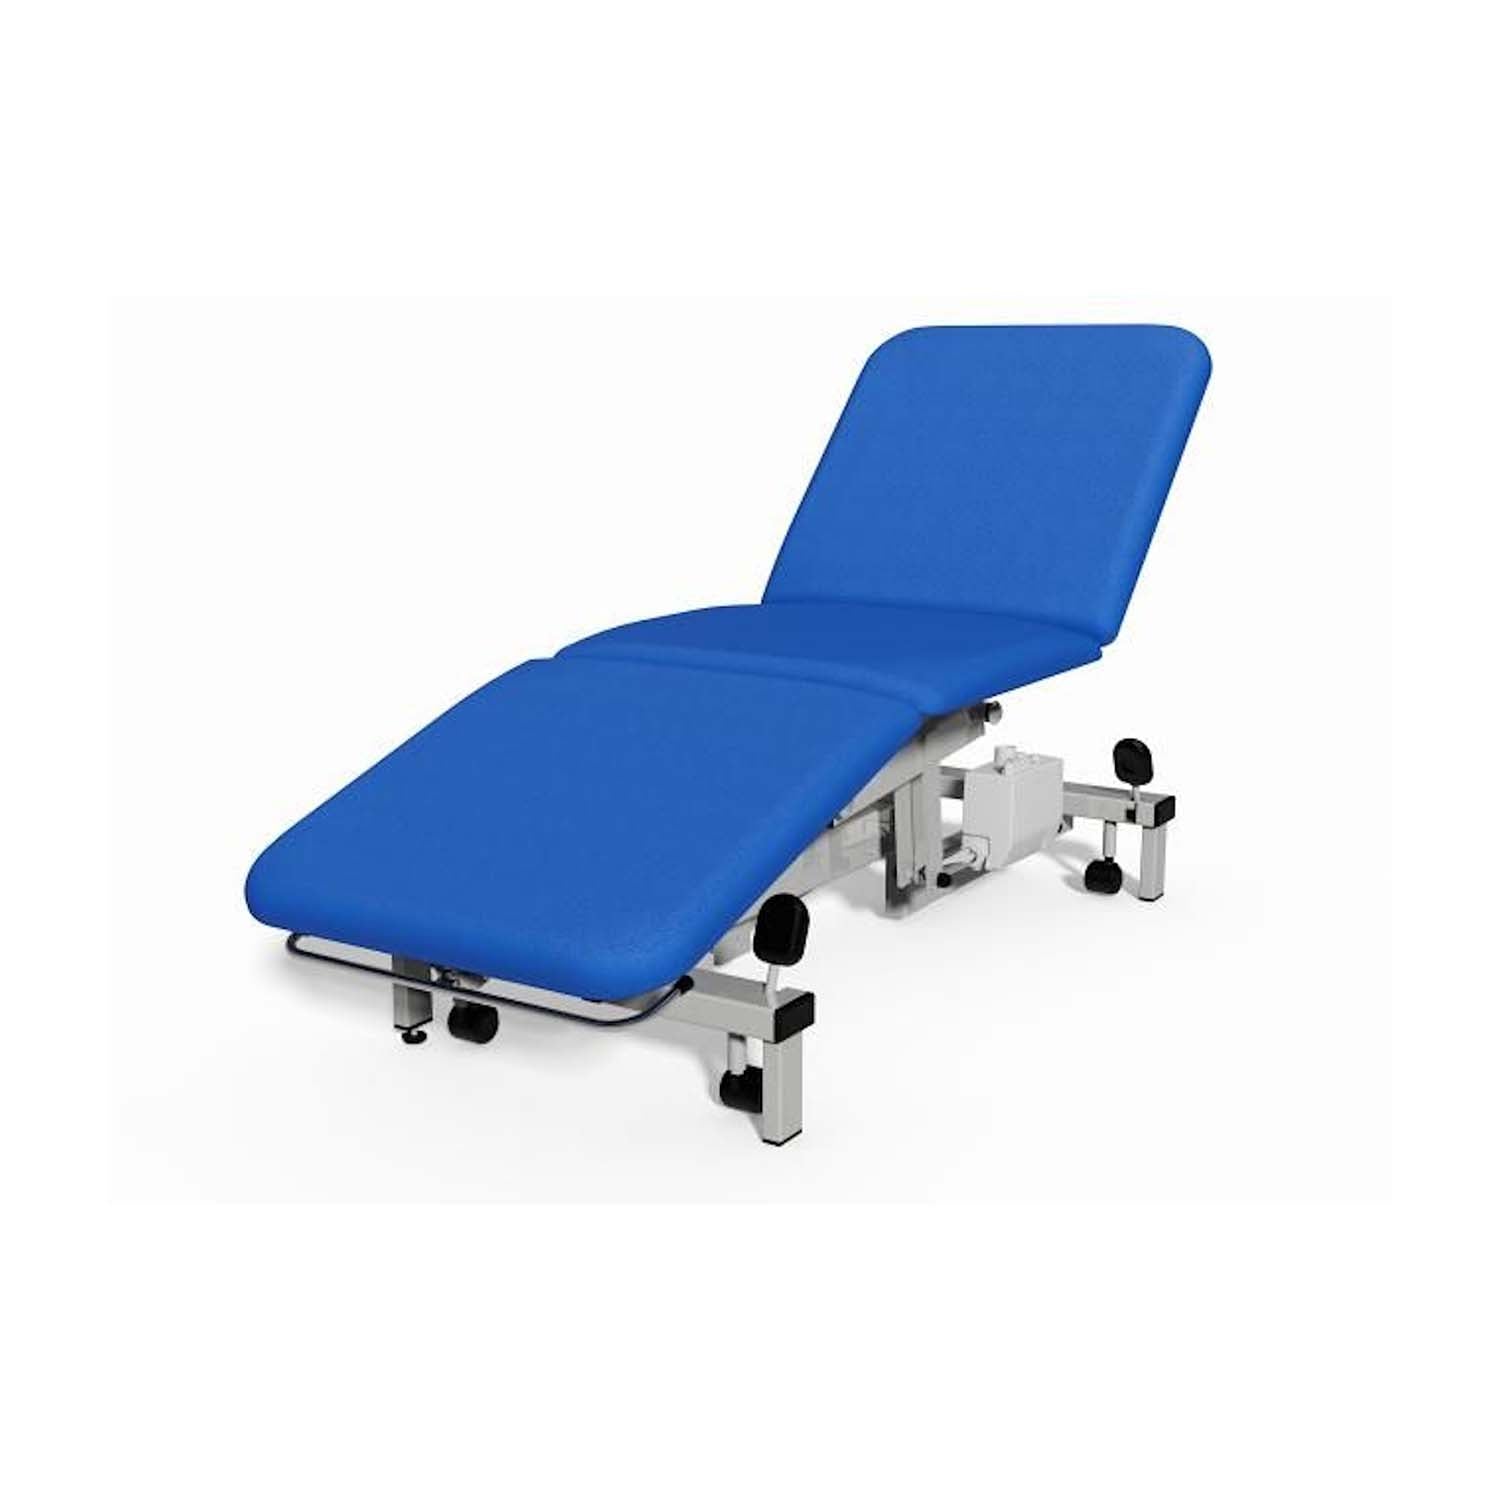 Plinth 2000 Model 503 3 Section Examination Couch | Hydraulic | Atlantic Blue